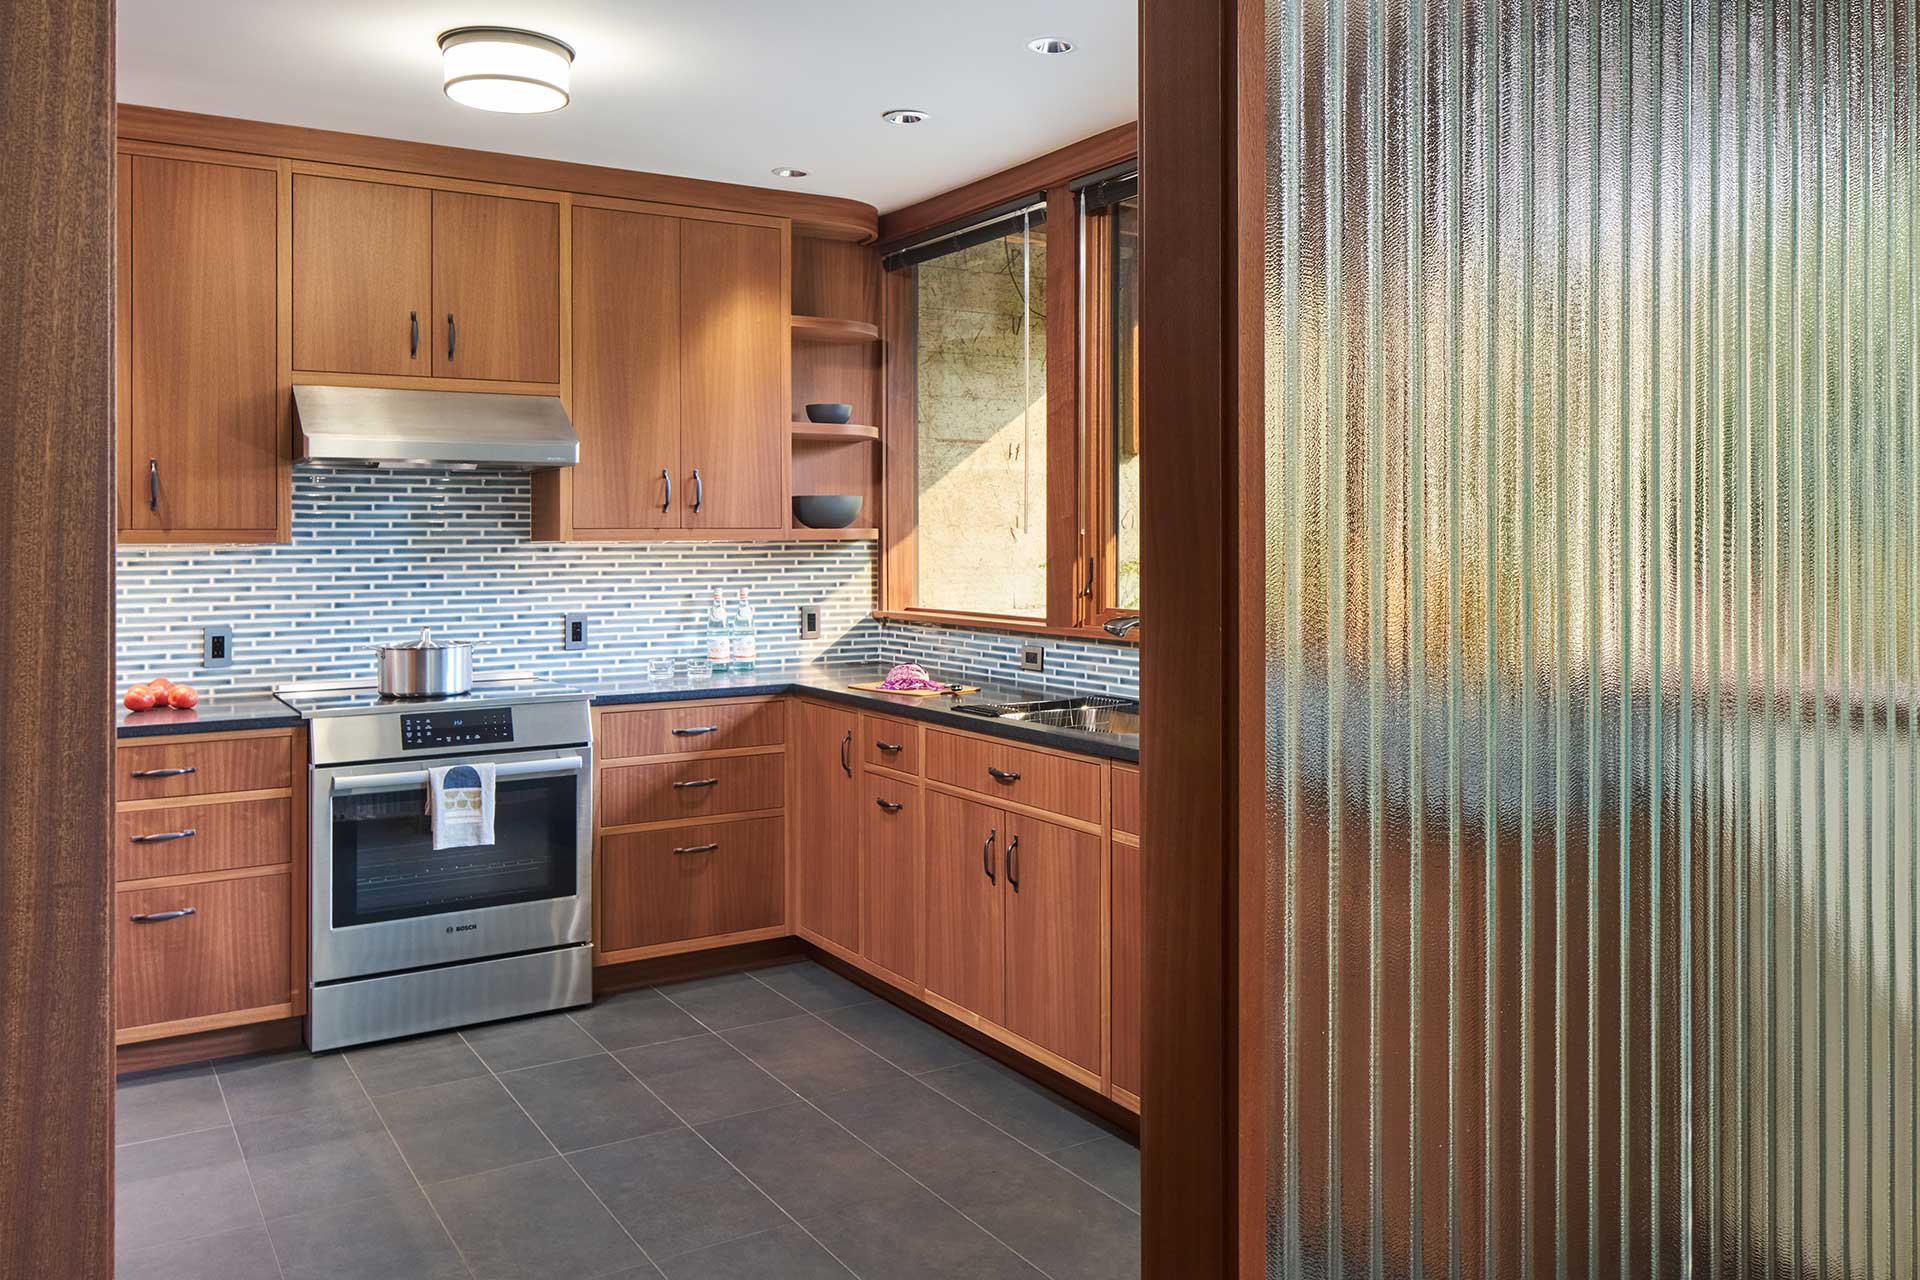 The renovated kitchen is partially hidden from the living room by a glass screen that is original to the house.